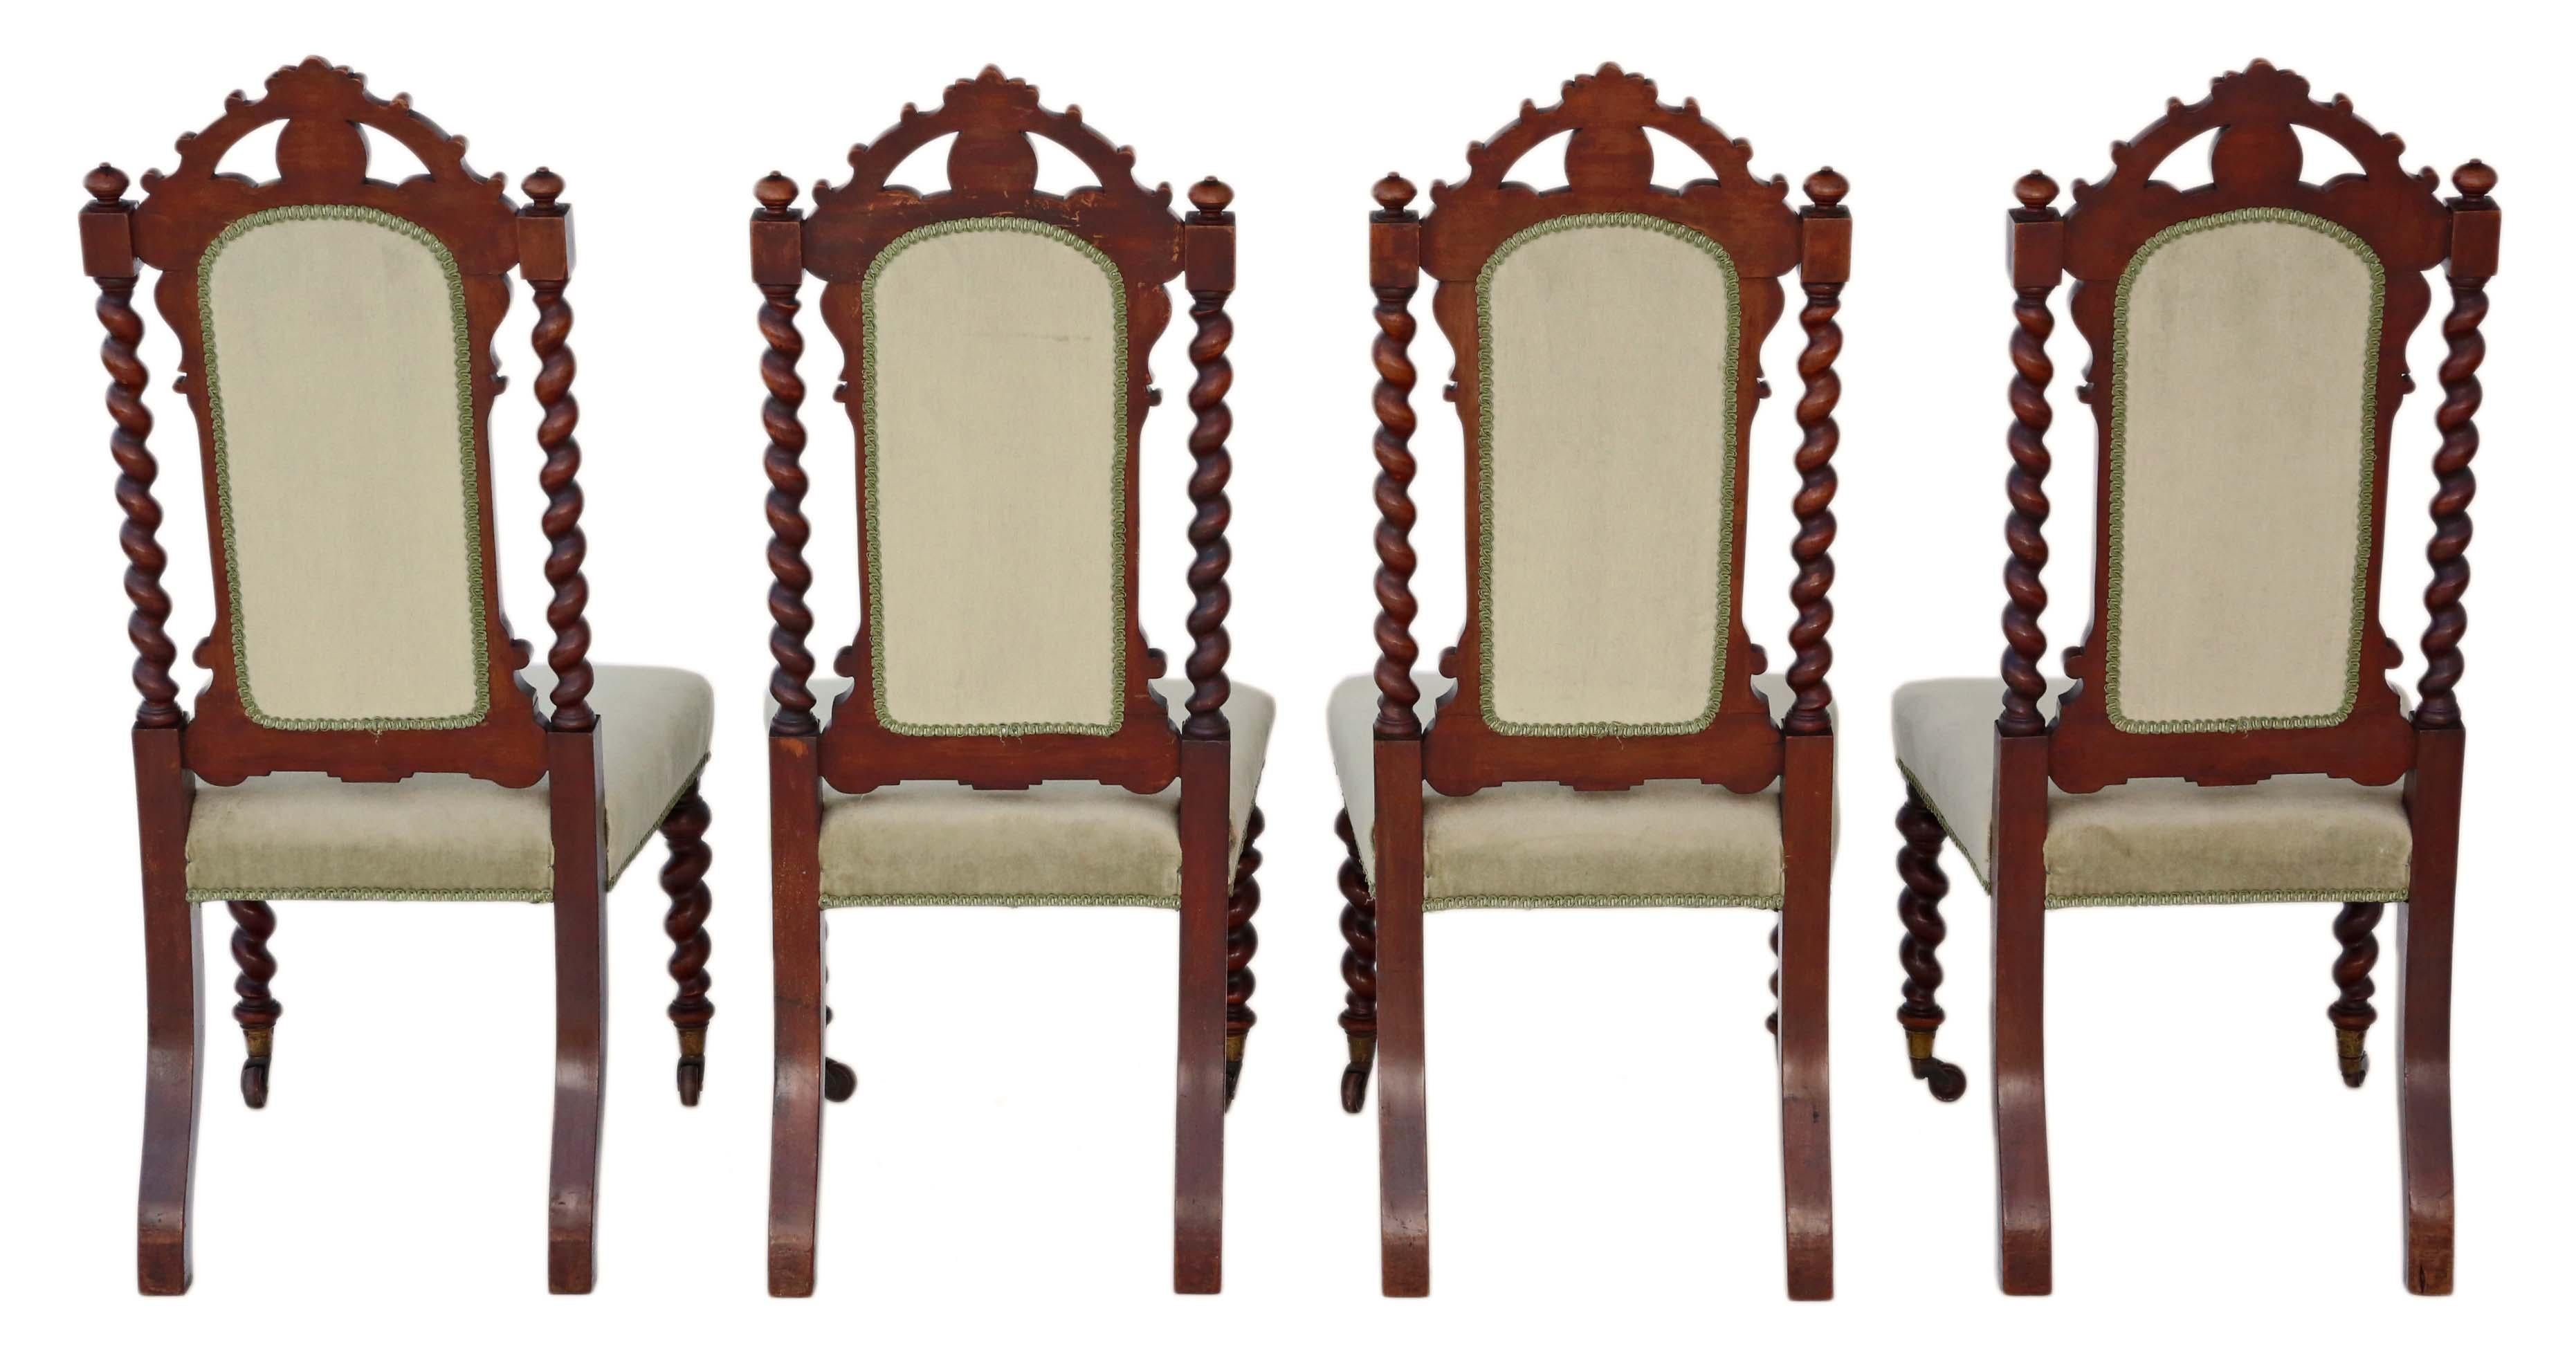 Antique quality set of 4 Victorian mahogany twist high back dining chairs, circa 1880.
A very rare find with attractive twist carved legs and backs. Grand imposing chairs.
Solid, heavy and strong with no loose joints and no woodworm.
Green velour